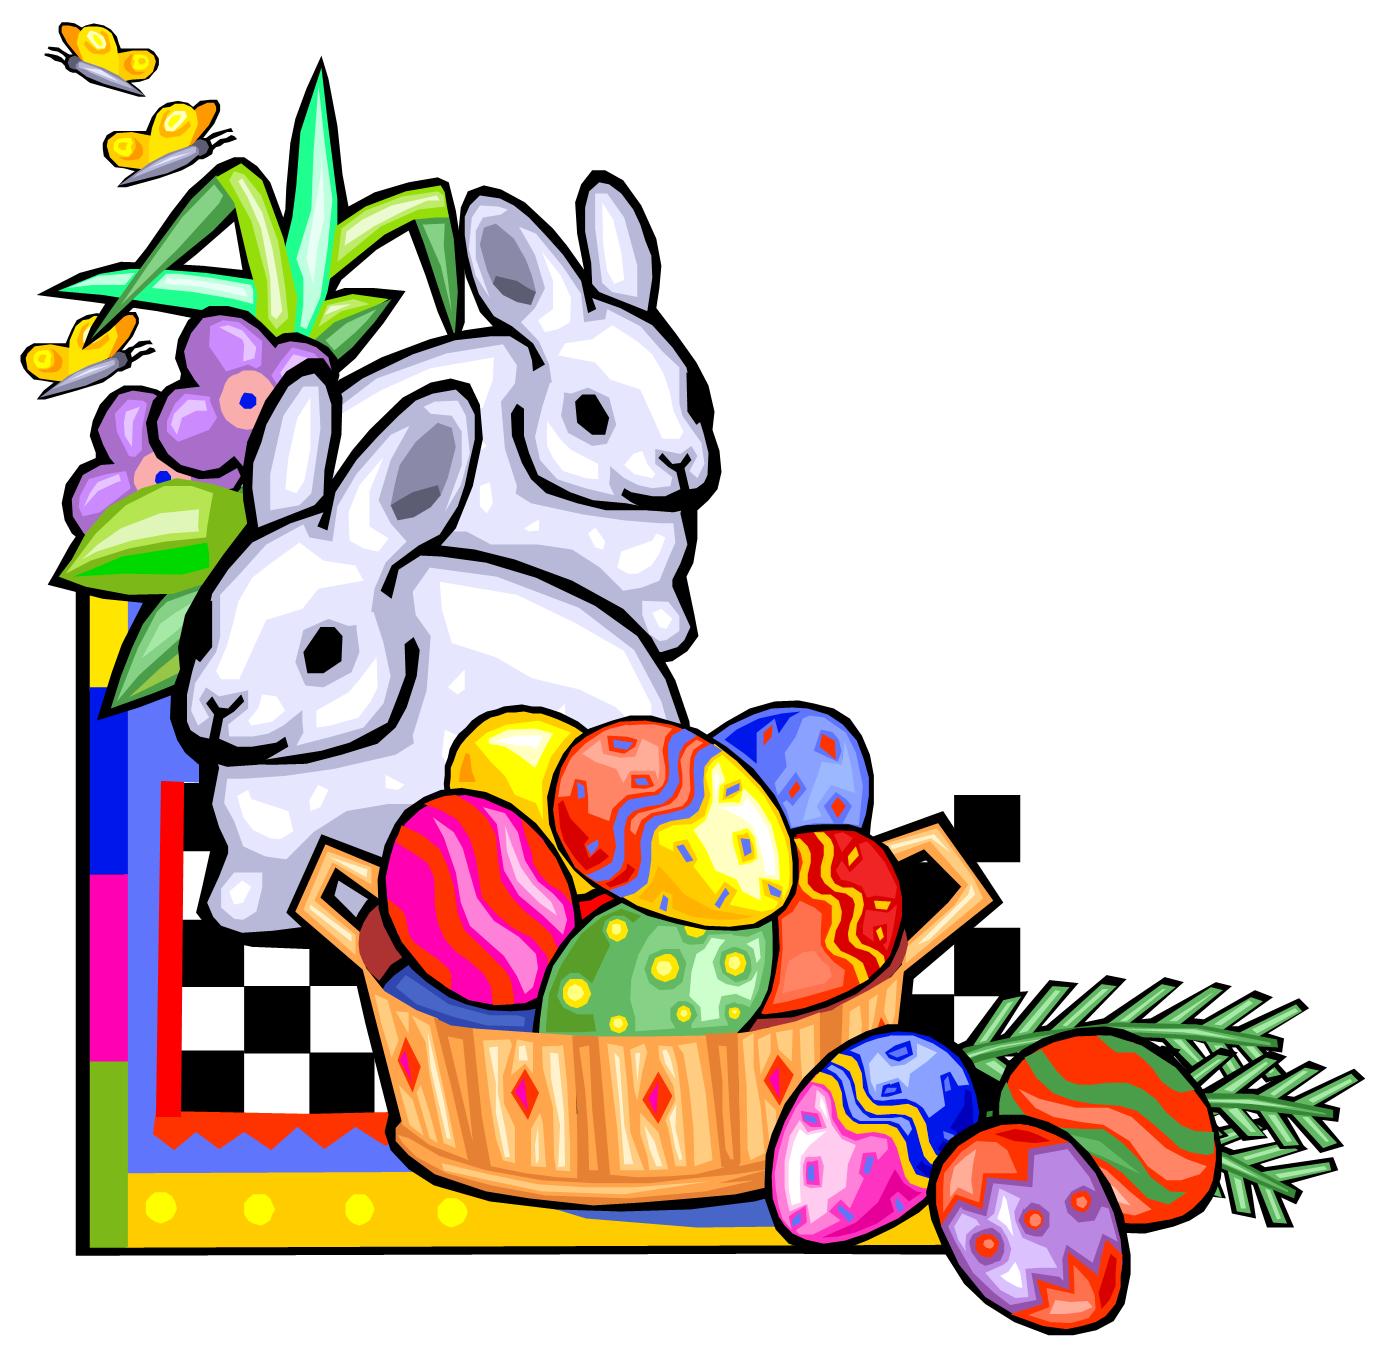 Russell County Public Library: Easter Egg Hunt at the Library!